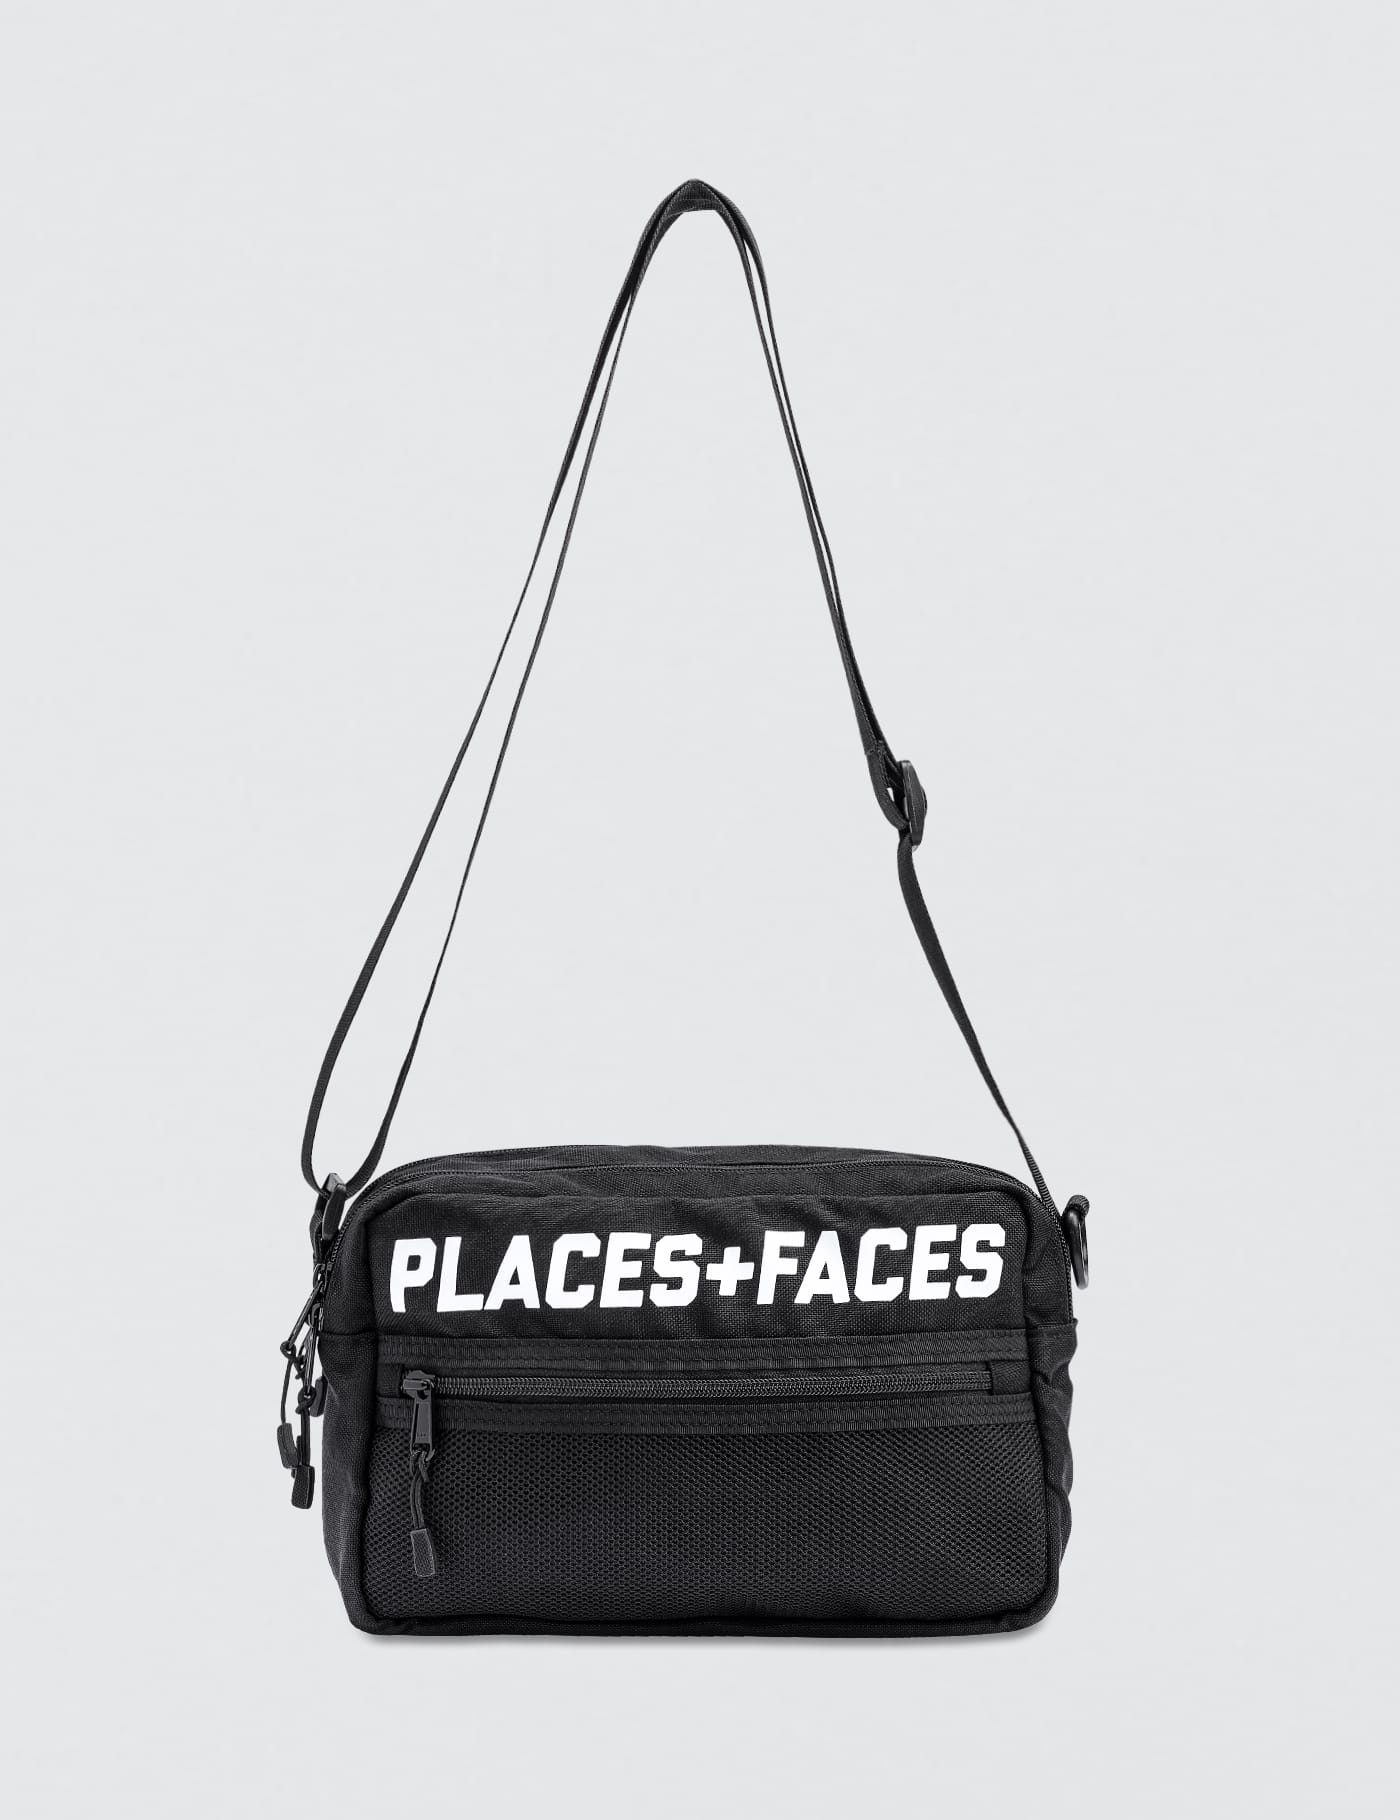 Places + Faces - Pouch Bag | HBX - Globally Curated Fashion and